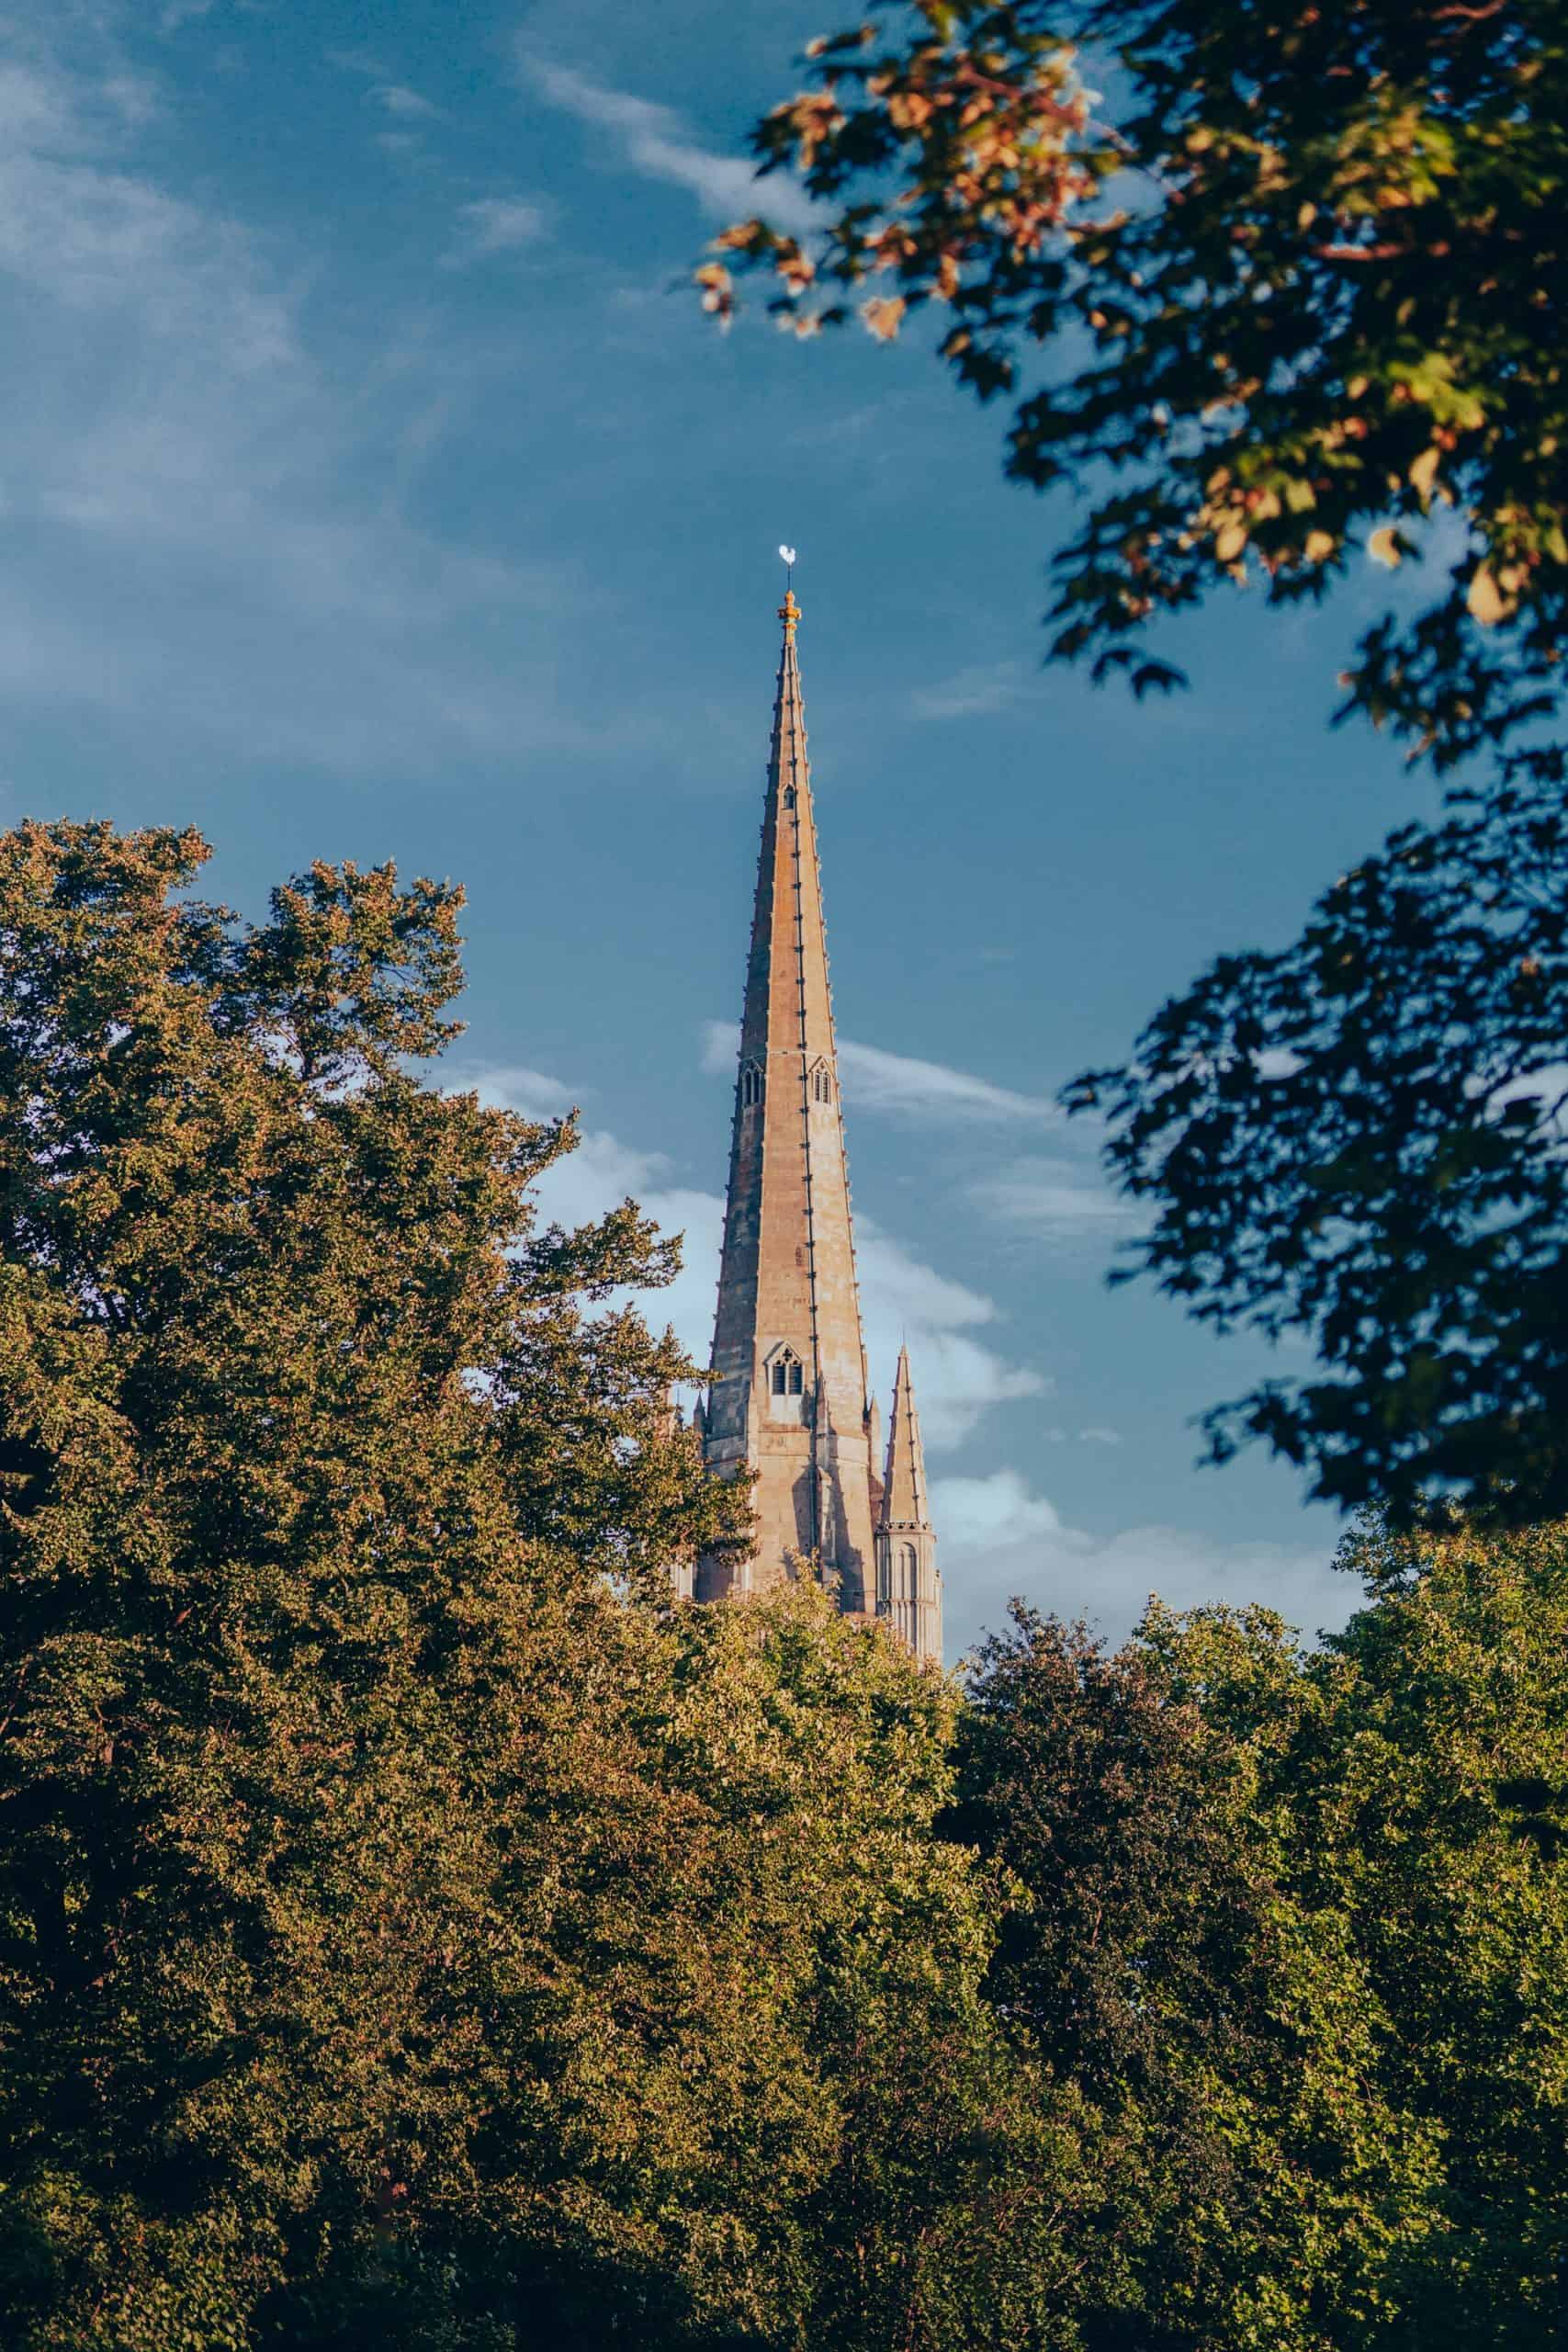 Best things to do in Norwich UK - James Hammond - Norwich Cathedral spire by Adam Rhodes on Unsplash